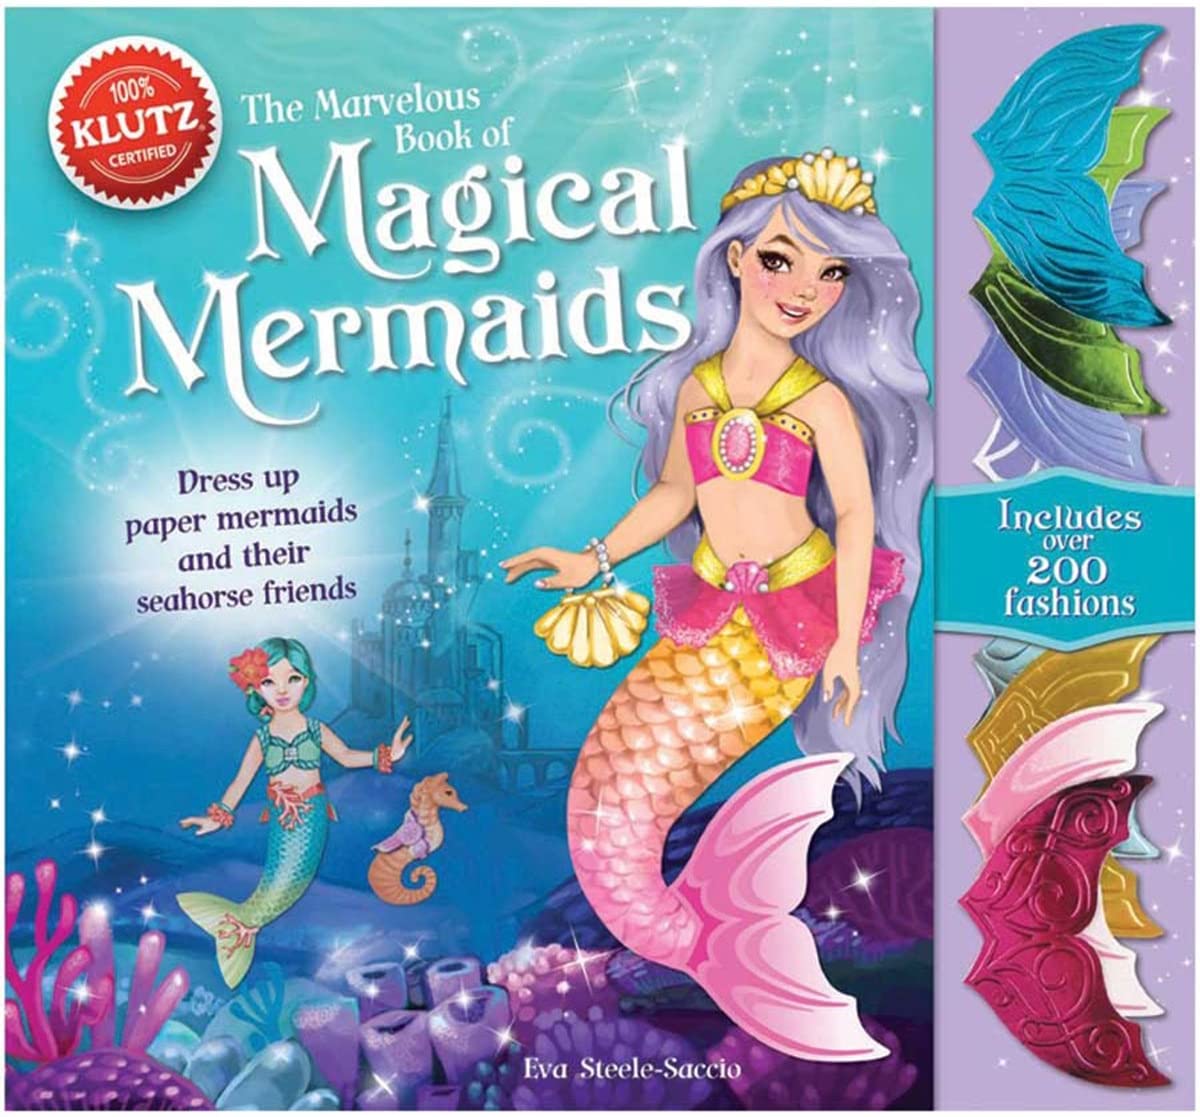 Klutz: The Marvelous Book of Magical Mermaids